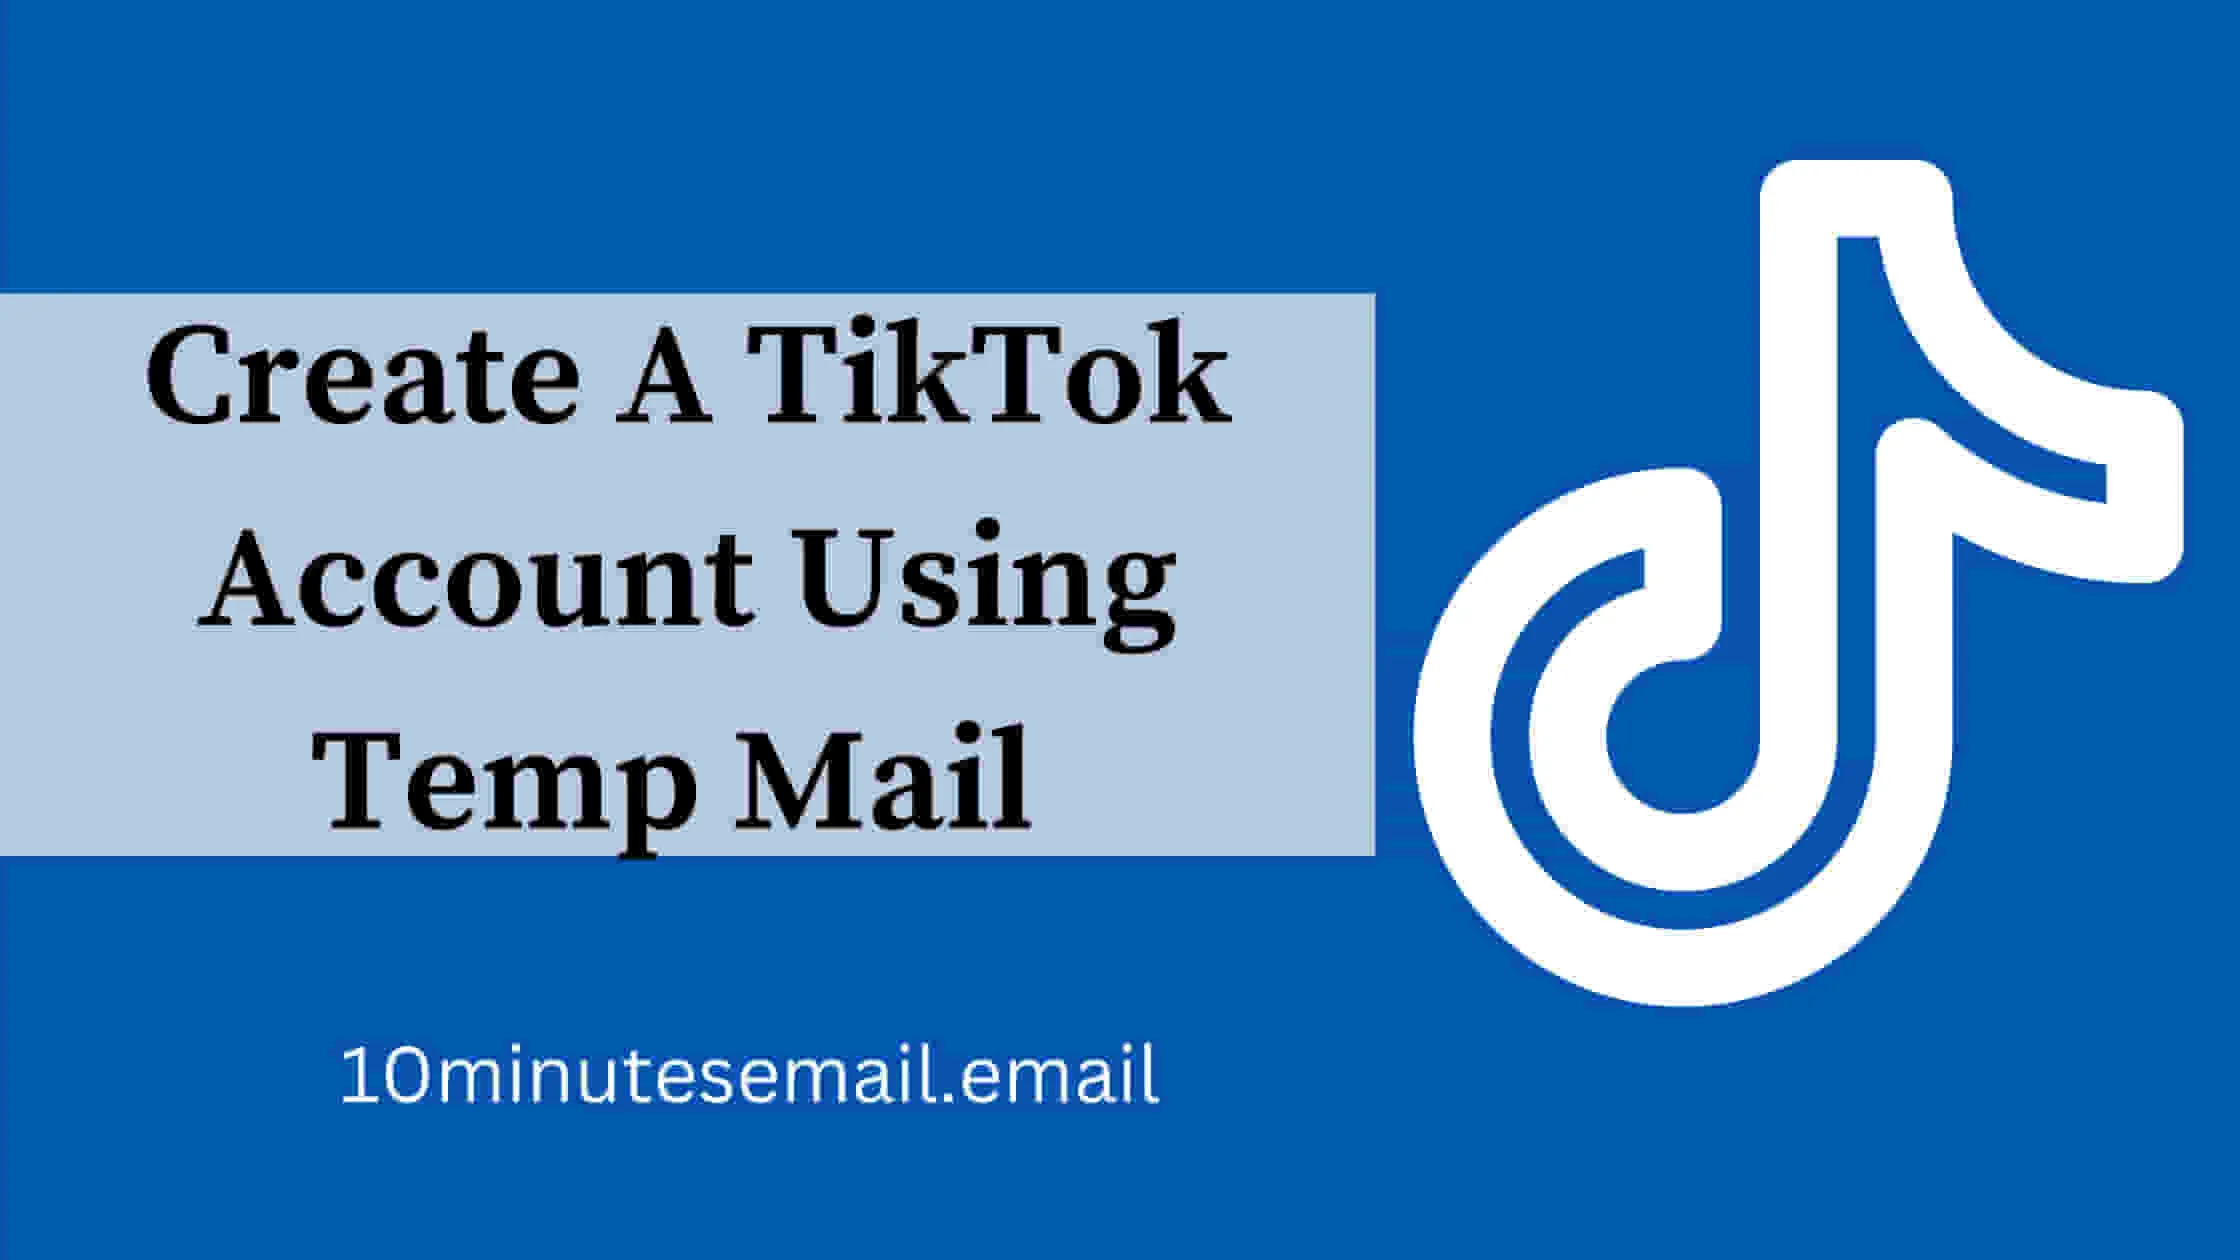 10 Minutes Email for TikTok Create A TT Account